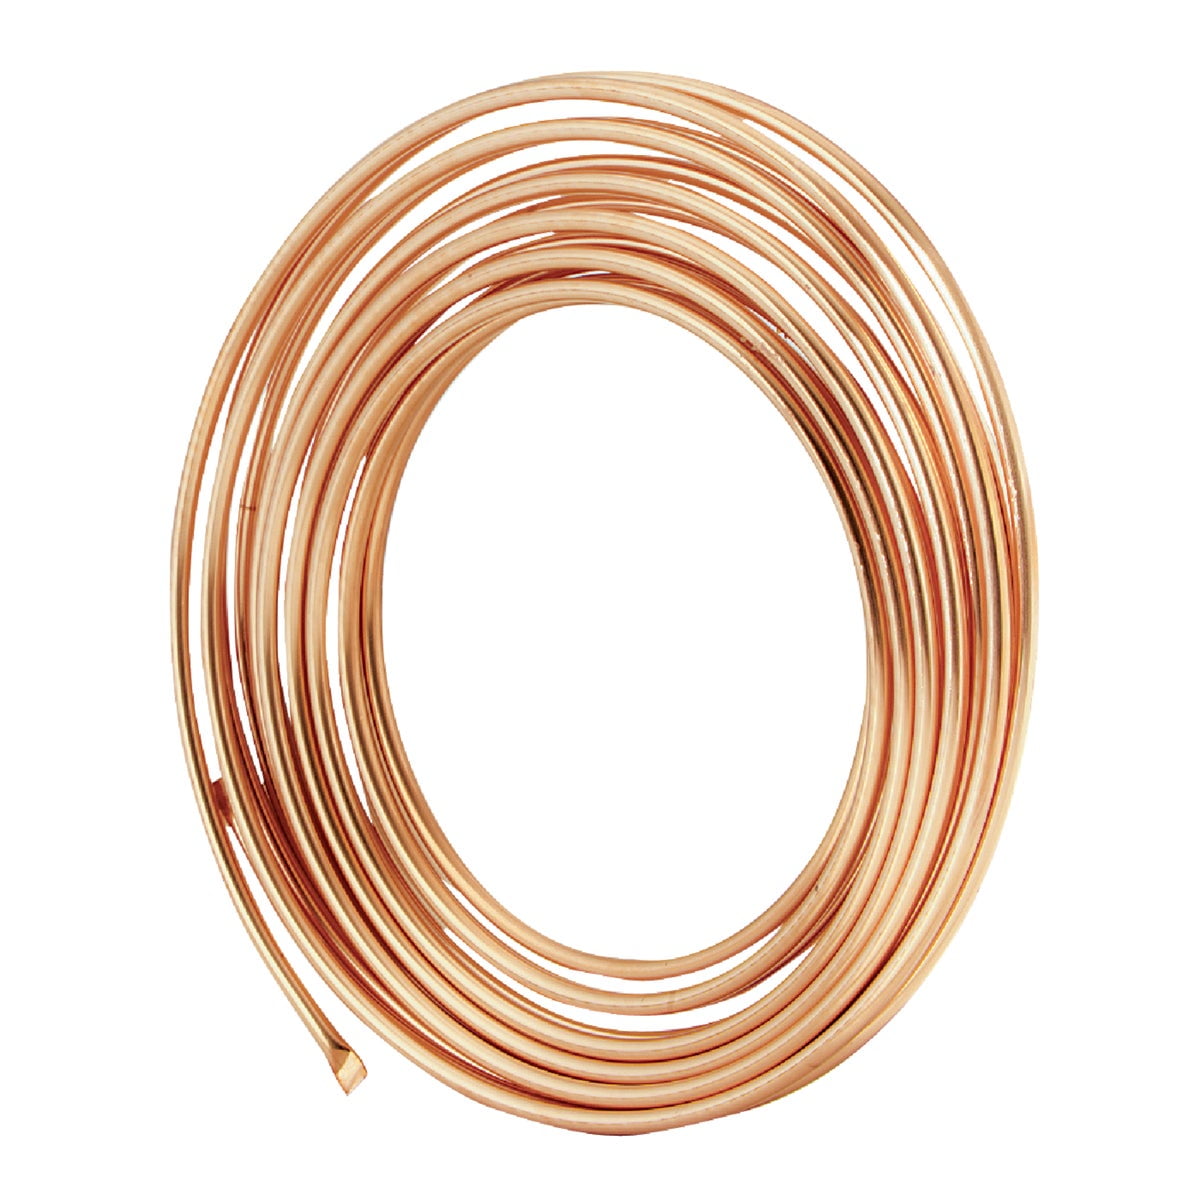 Refrigeration ACR Tubing 3/8 inch x 50 ft Soft Copper Tubing High Quality 